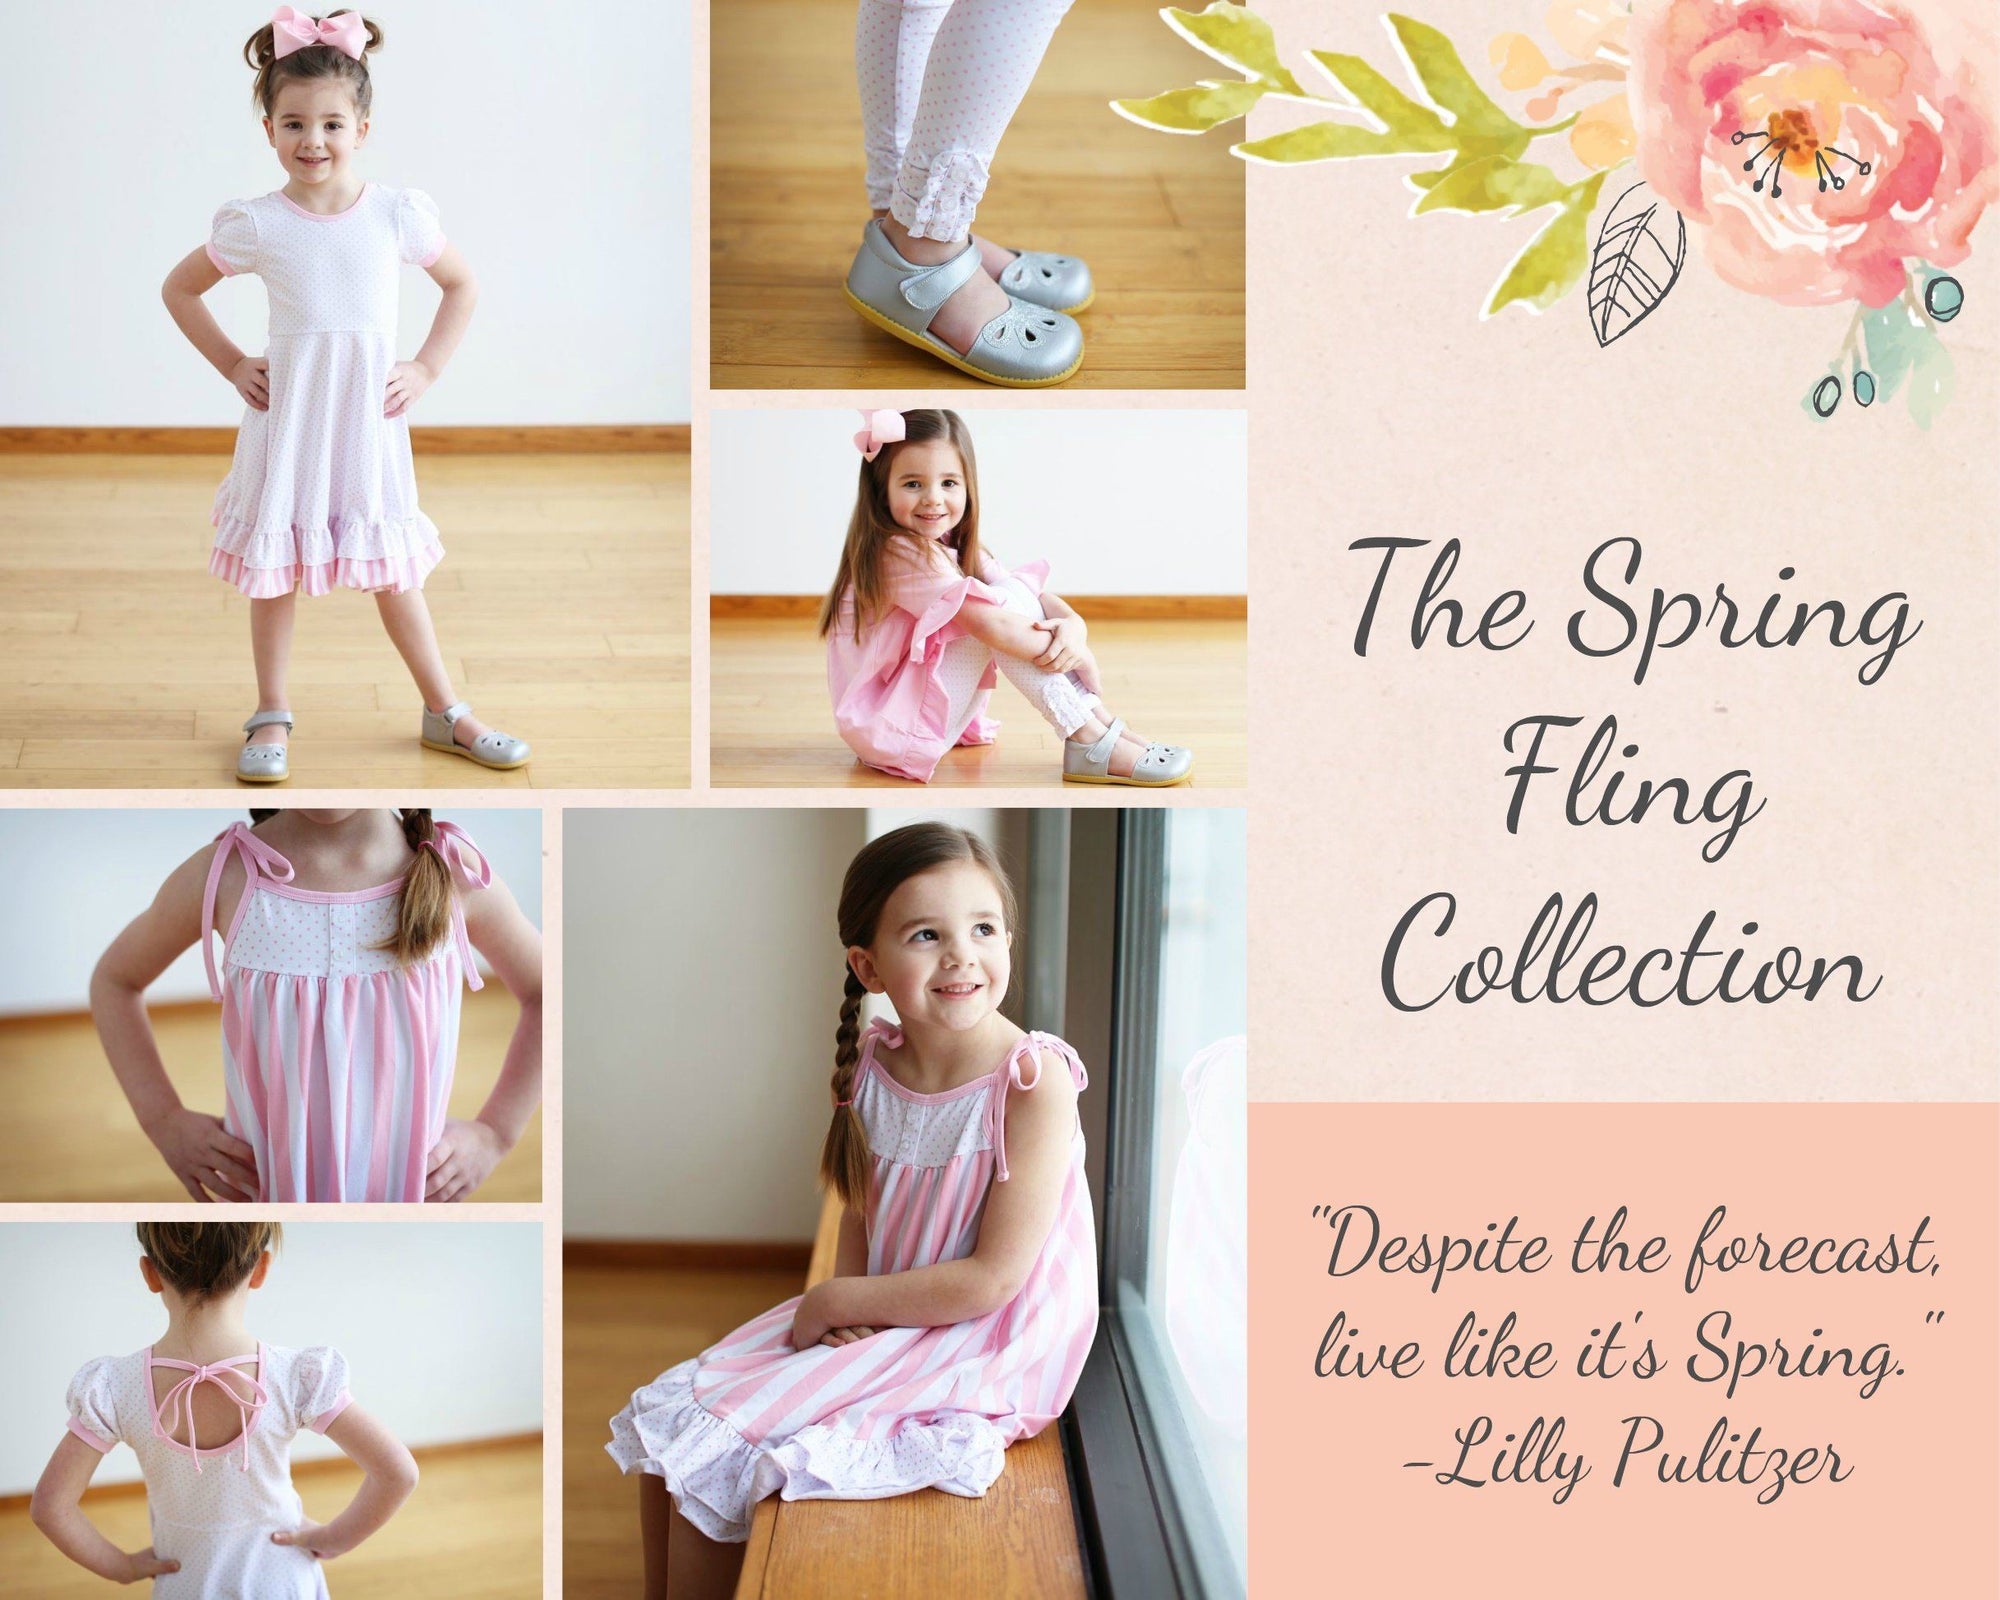 Introducing the Spring Fling Collection - NEW from AE!